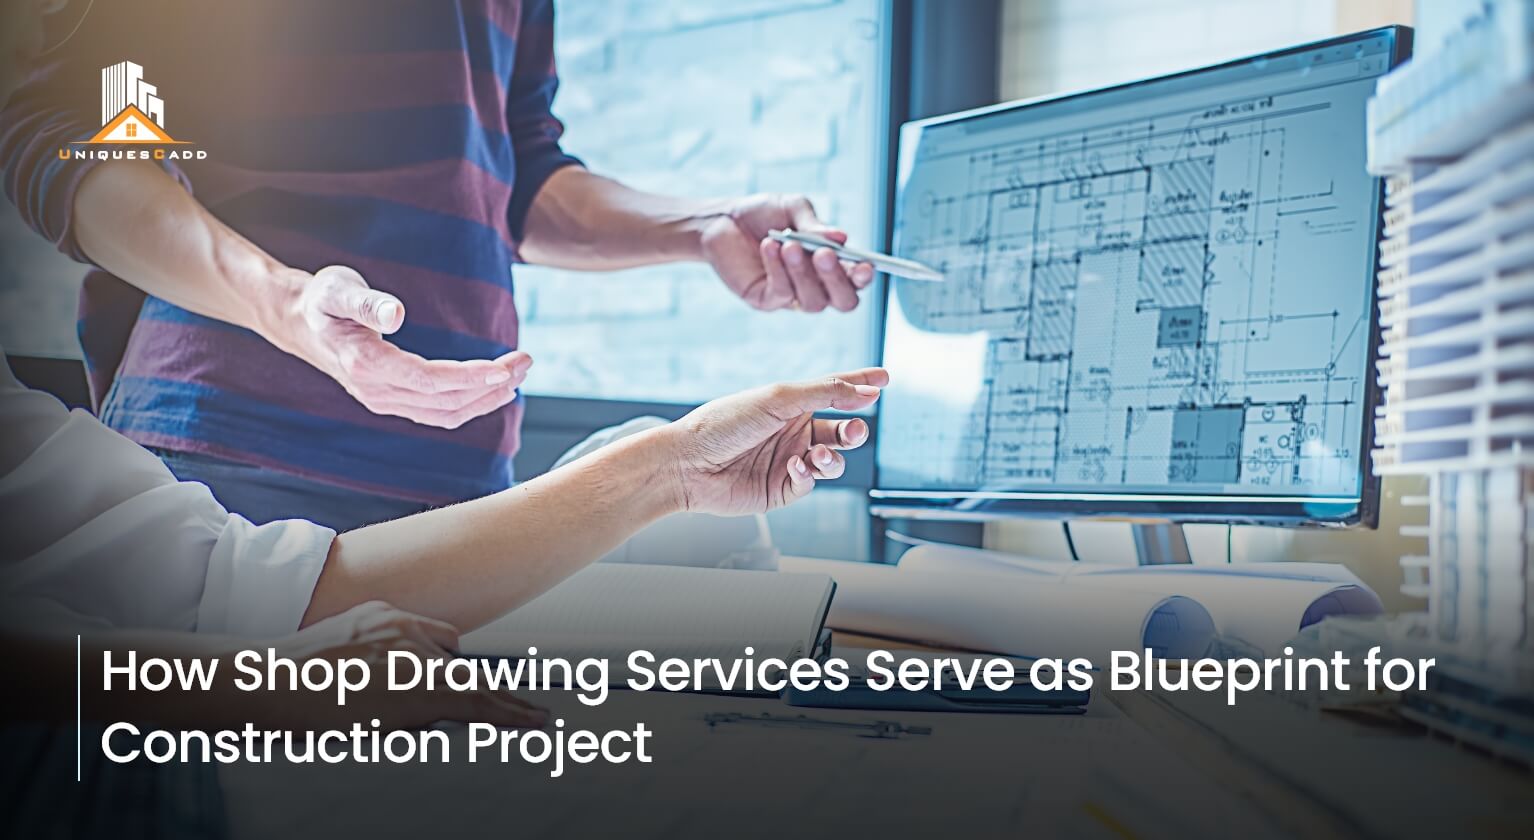 How Shop Drawing Services Serves as Blueprint for Construction Project